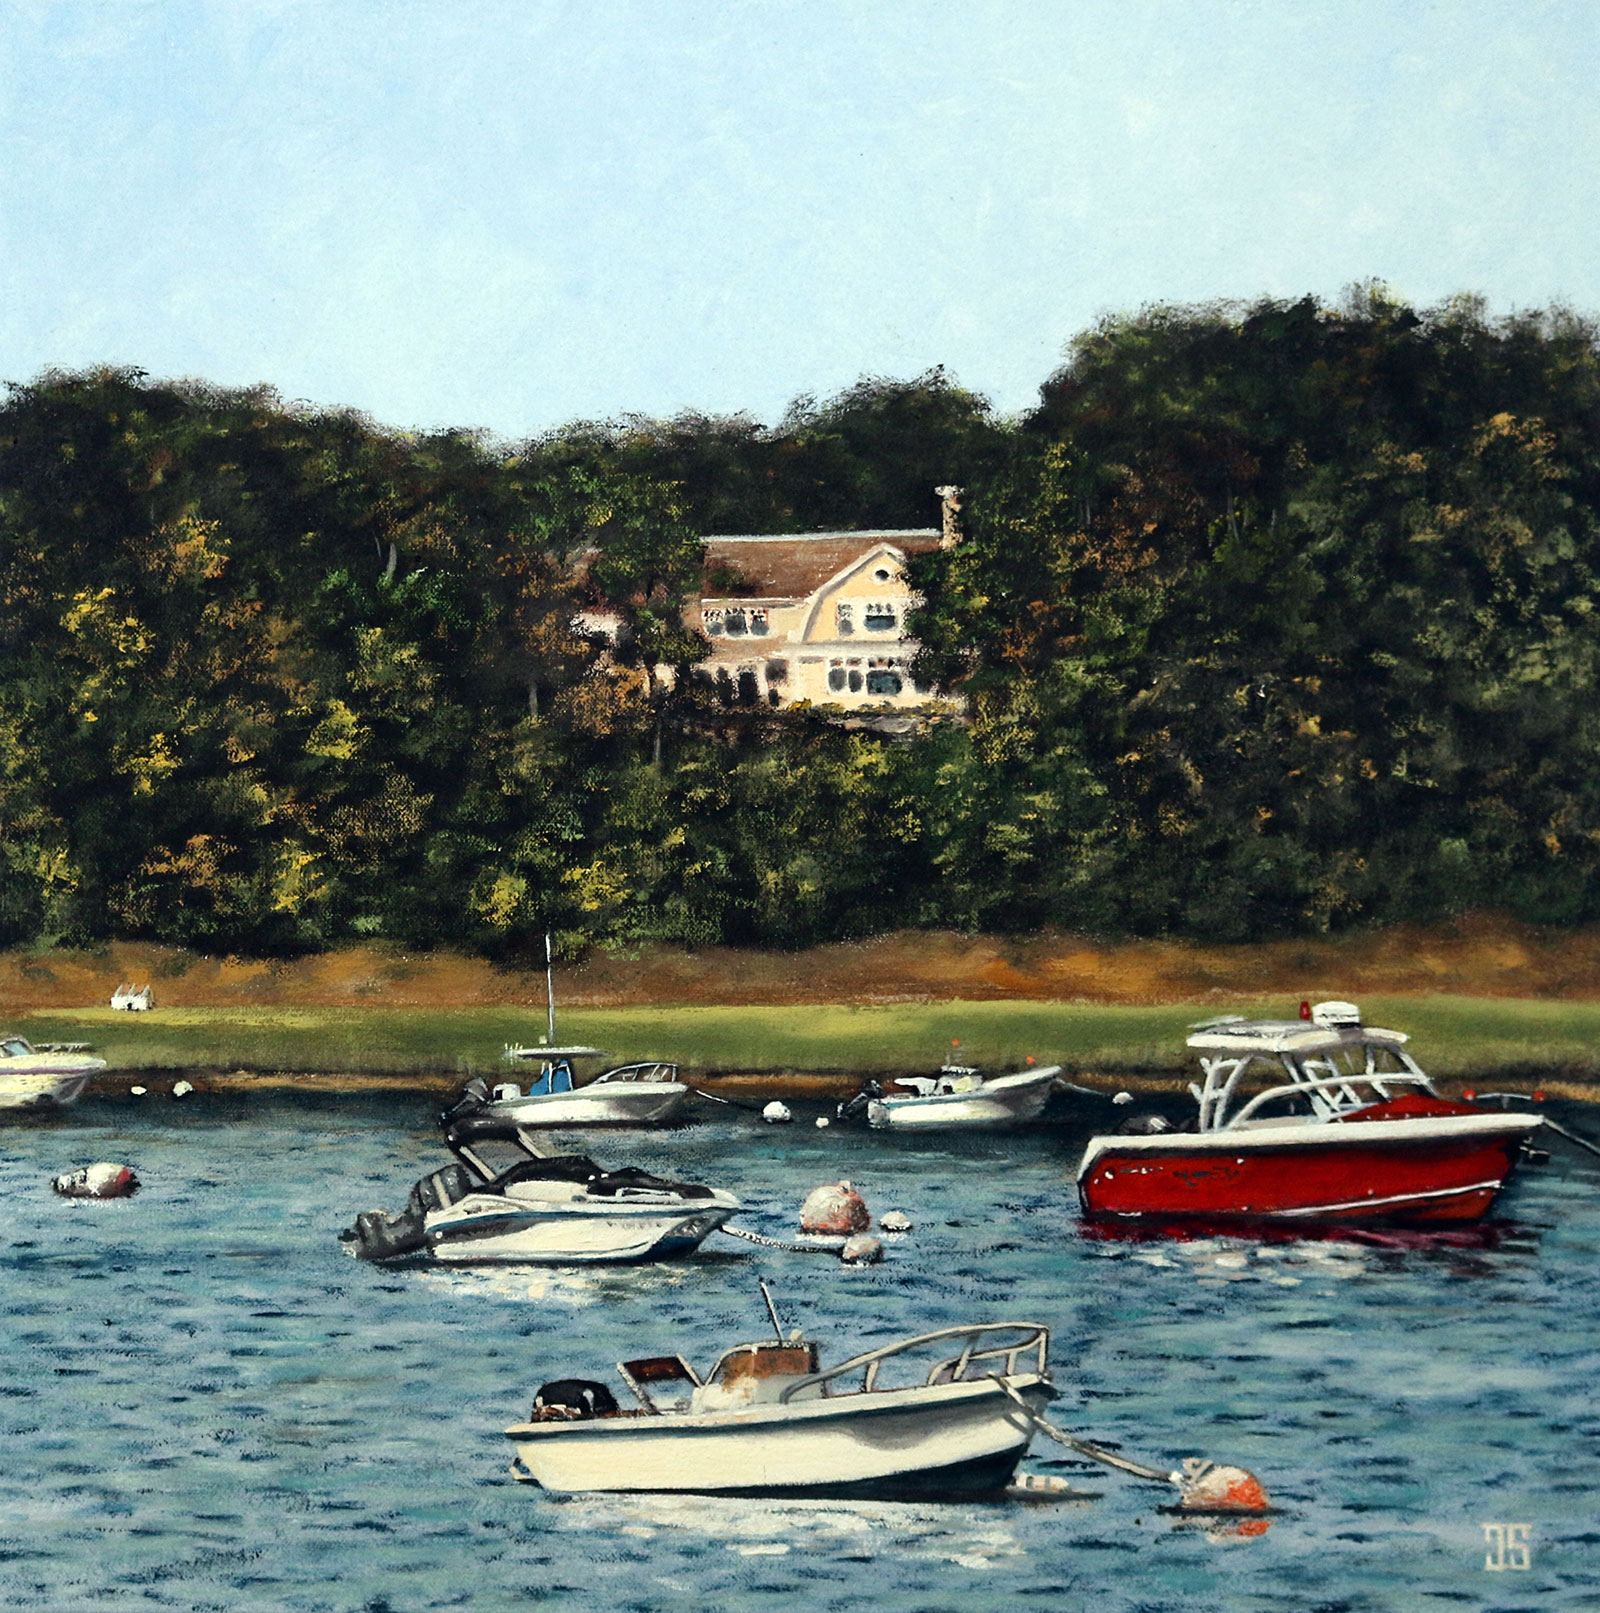 Oil painting "A Cove in Chatham" by Jeffrey Dale Starr